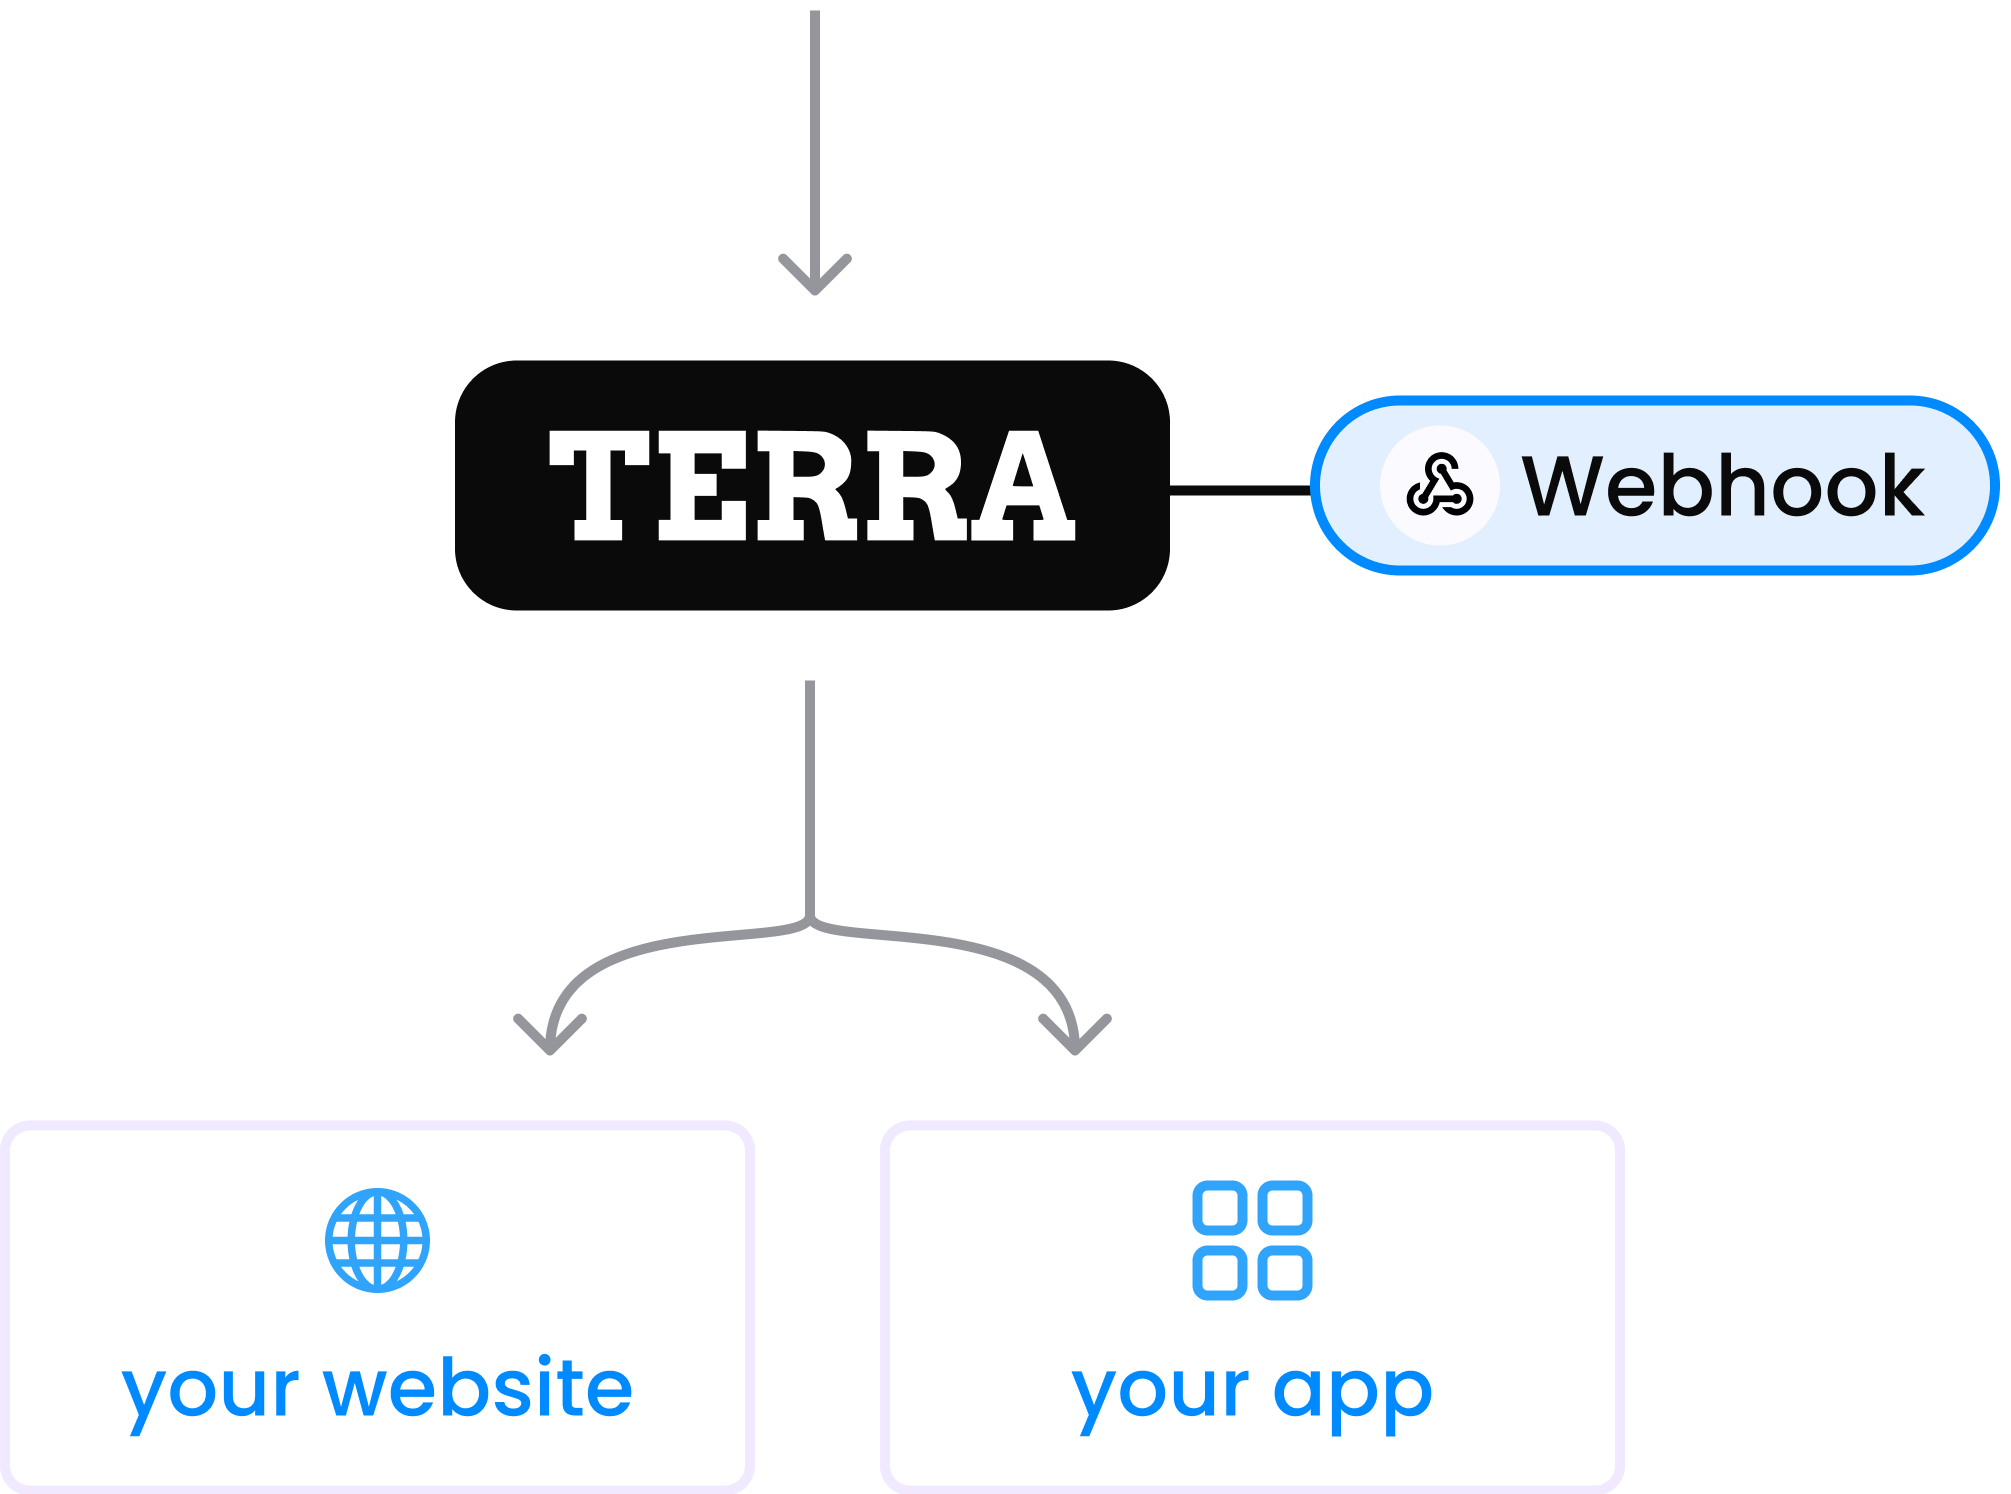 receiving data from core integration via webhooks to your app or website